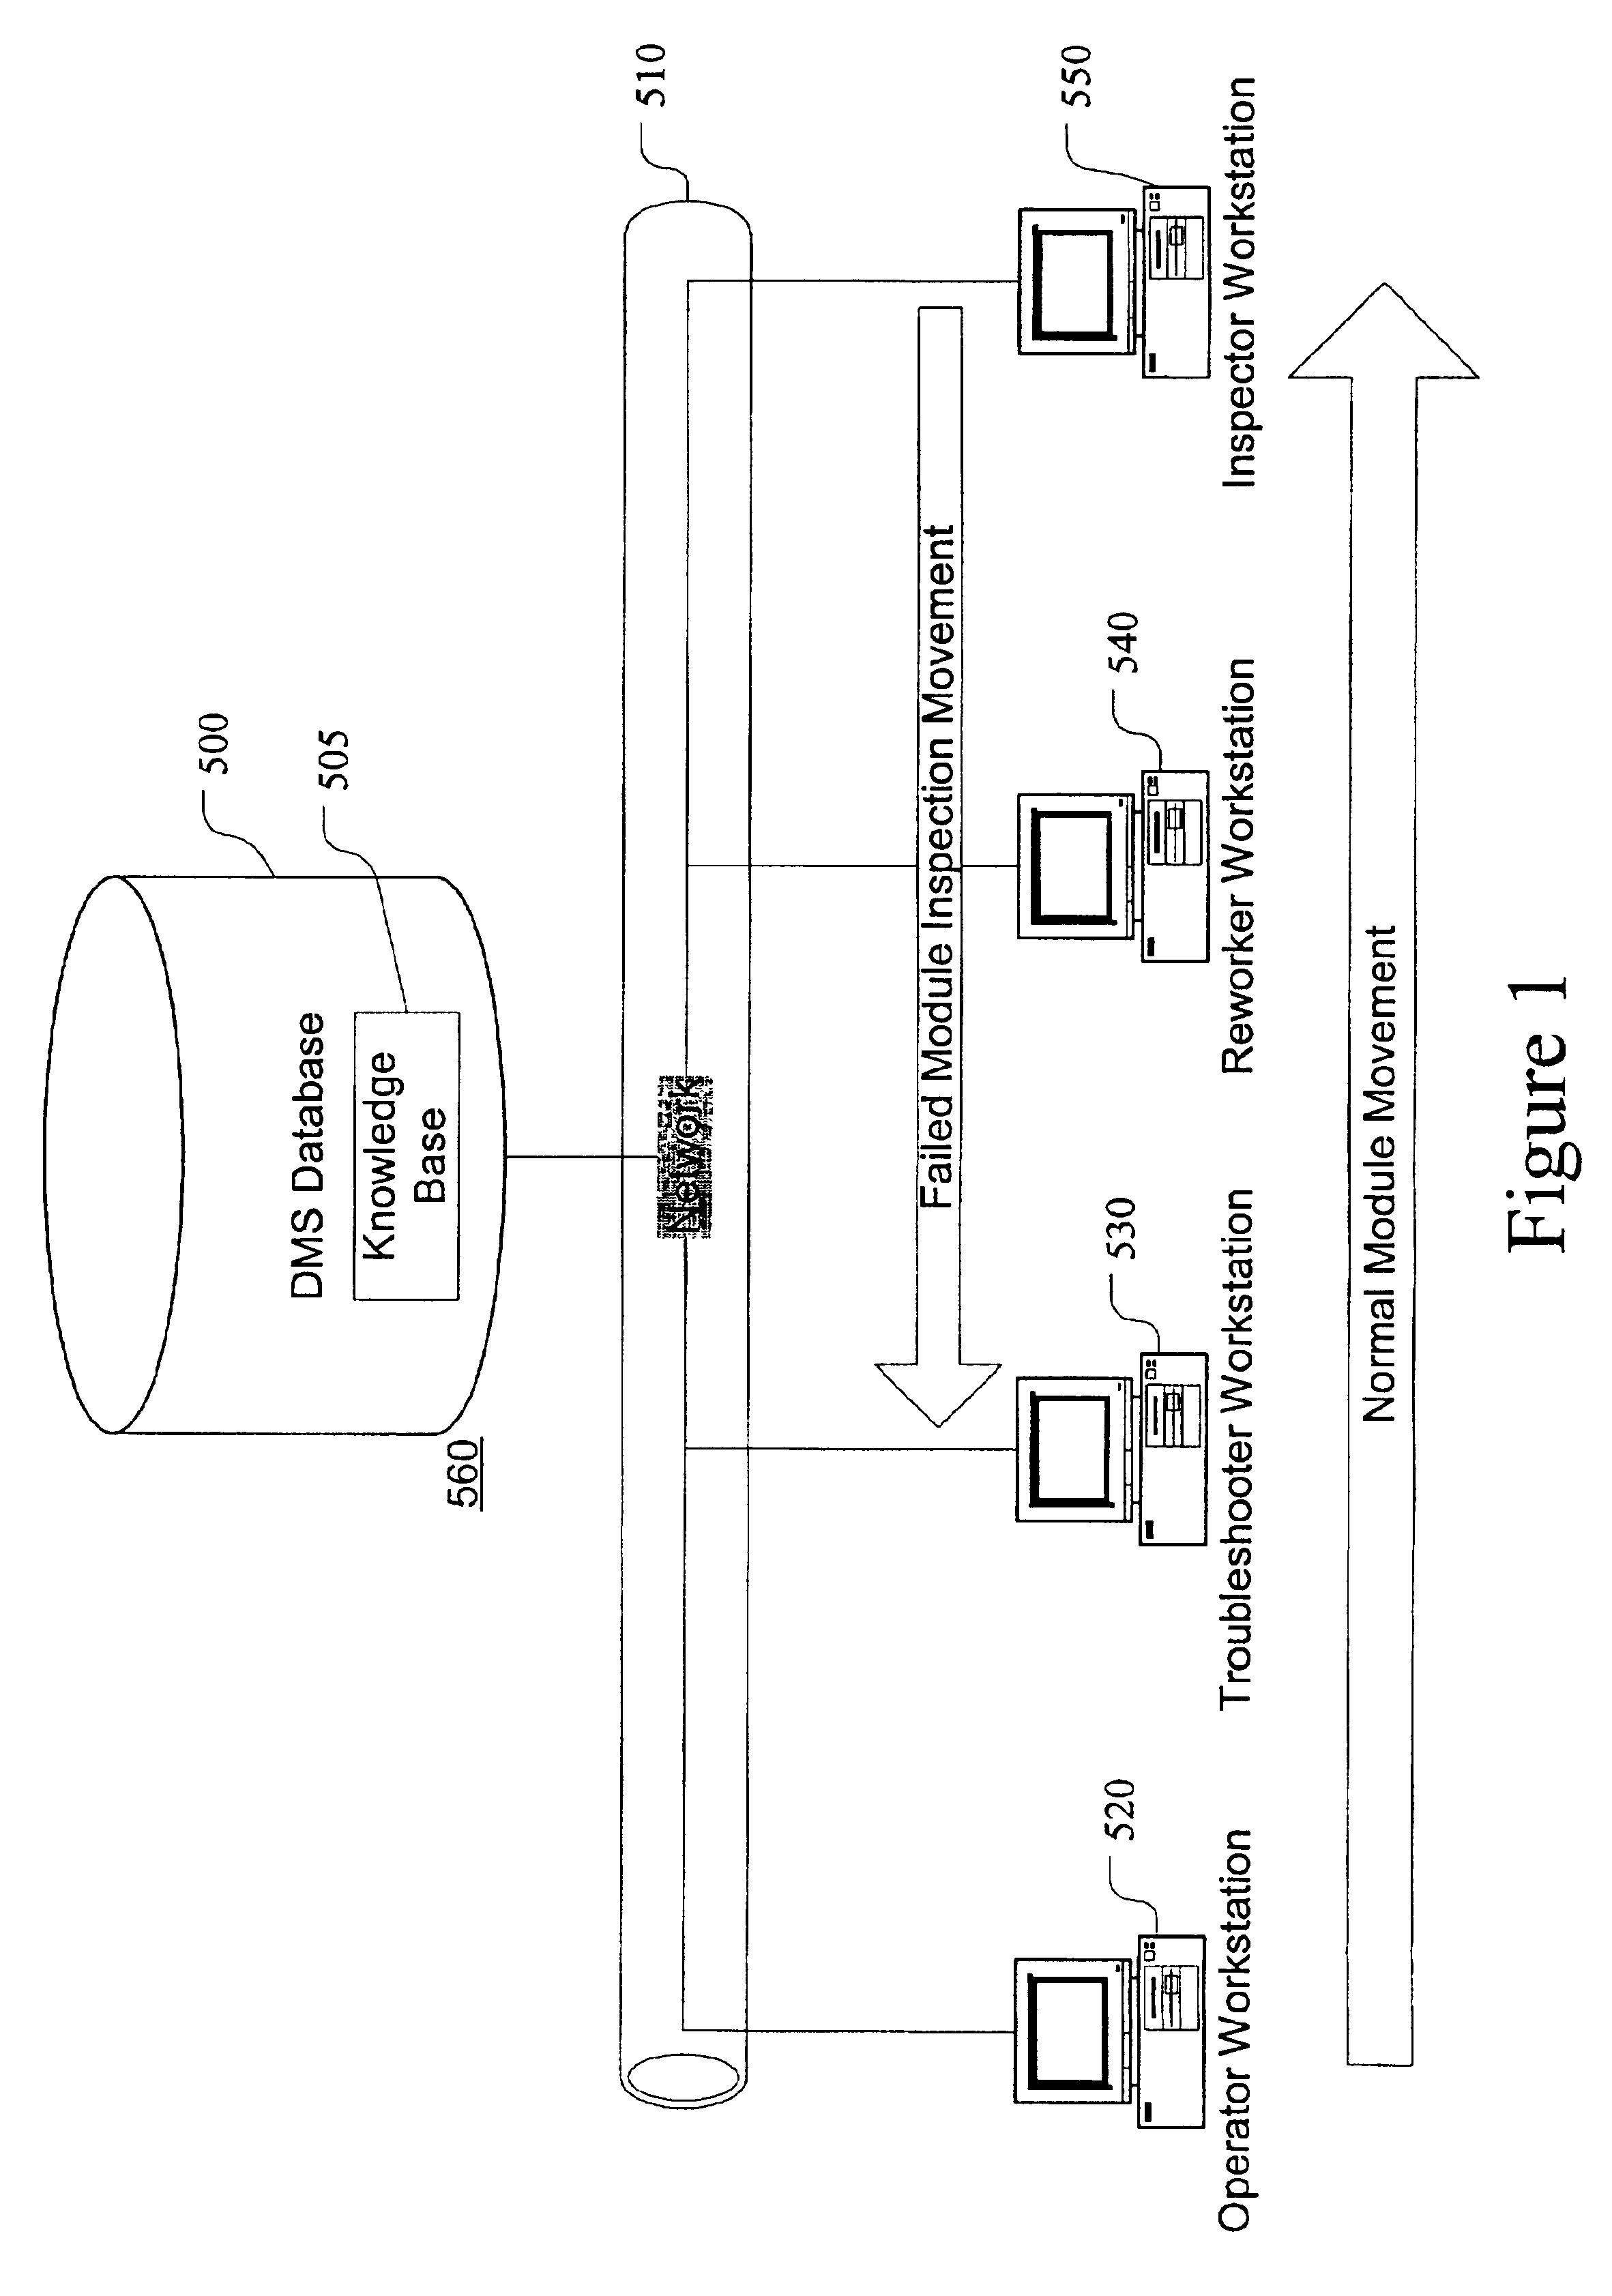 Method of improving quality of manufactured modules